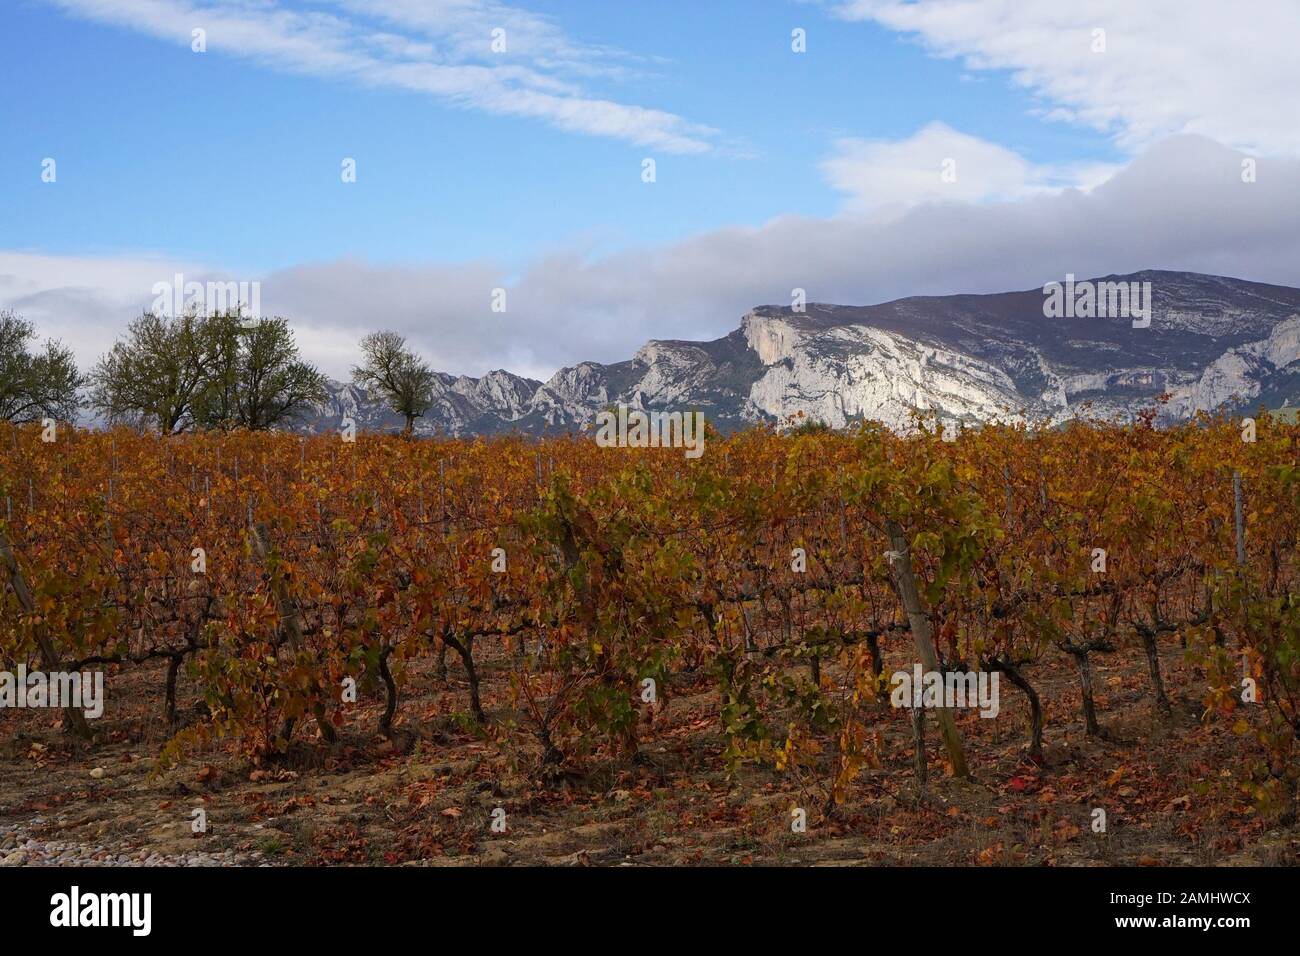 Autumnal vineyard with mountains and blue sky in the distance Stock Photo